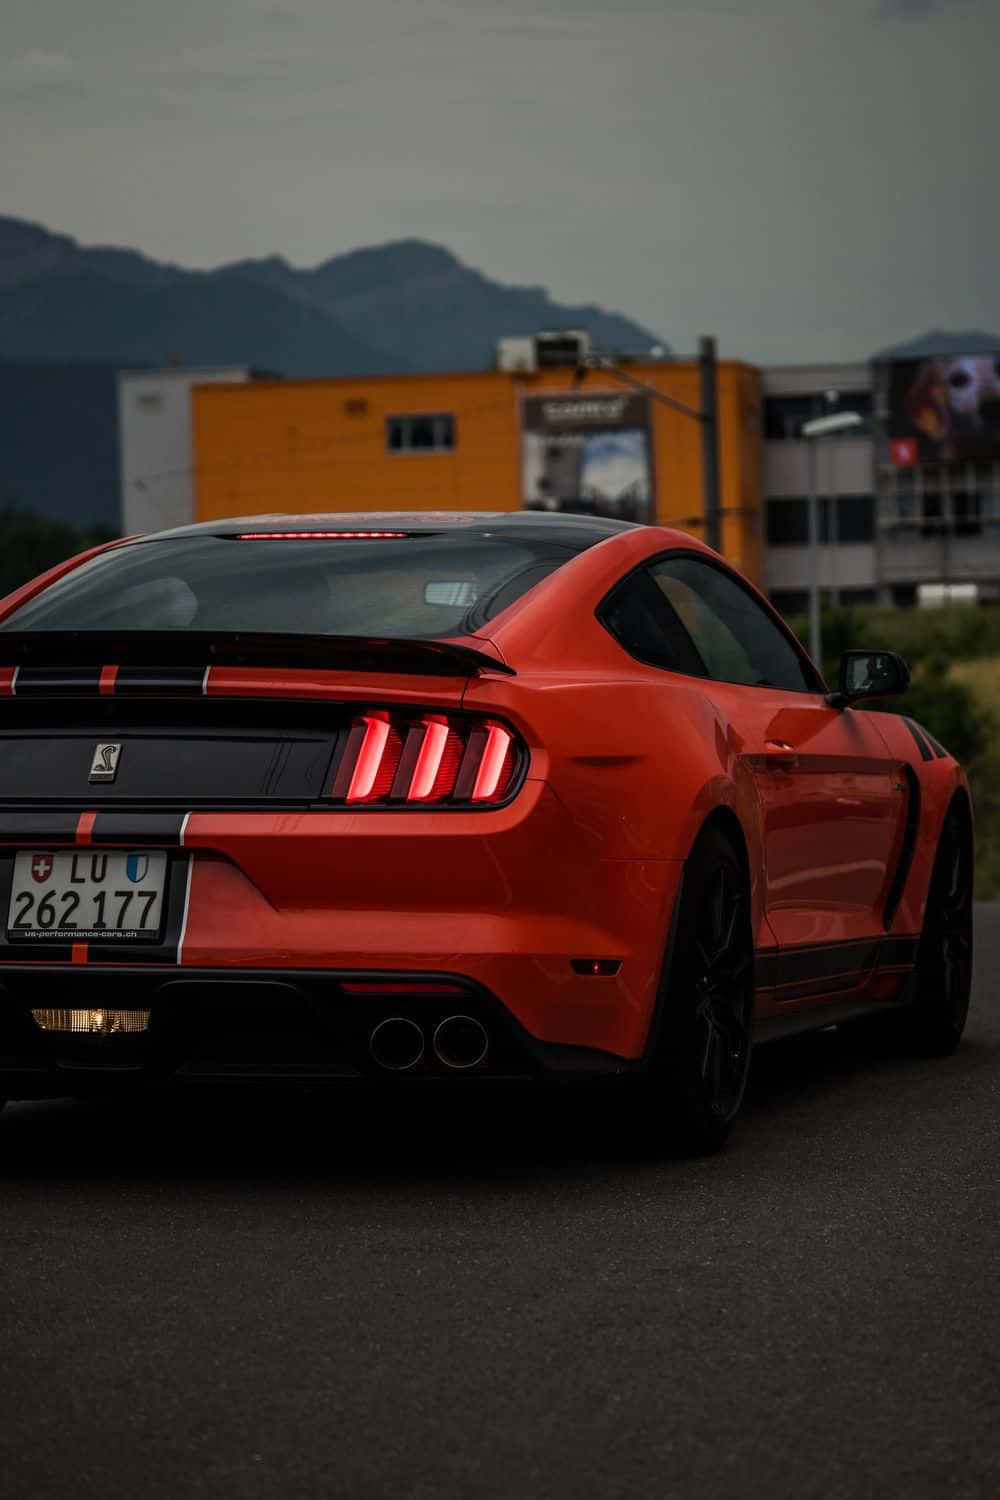 Sleek and Powerful Rear View of a Shelby Ford Mustang Wallpaper